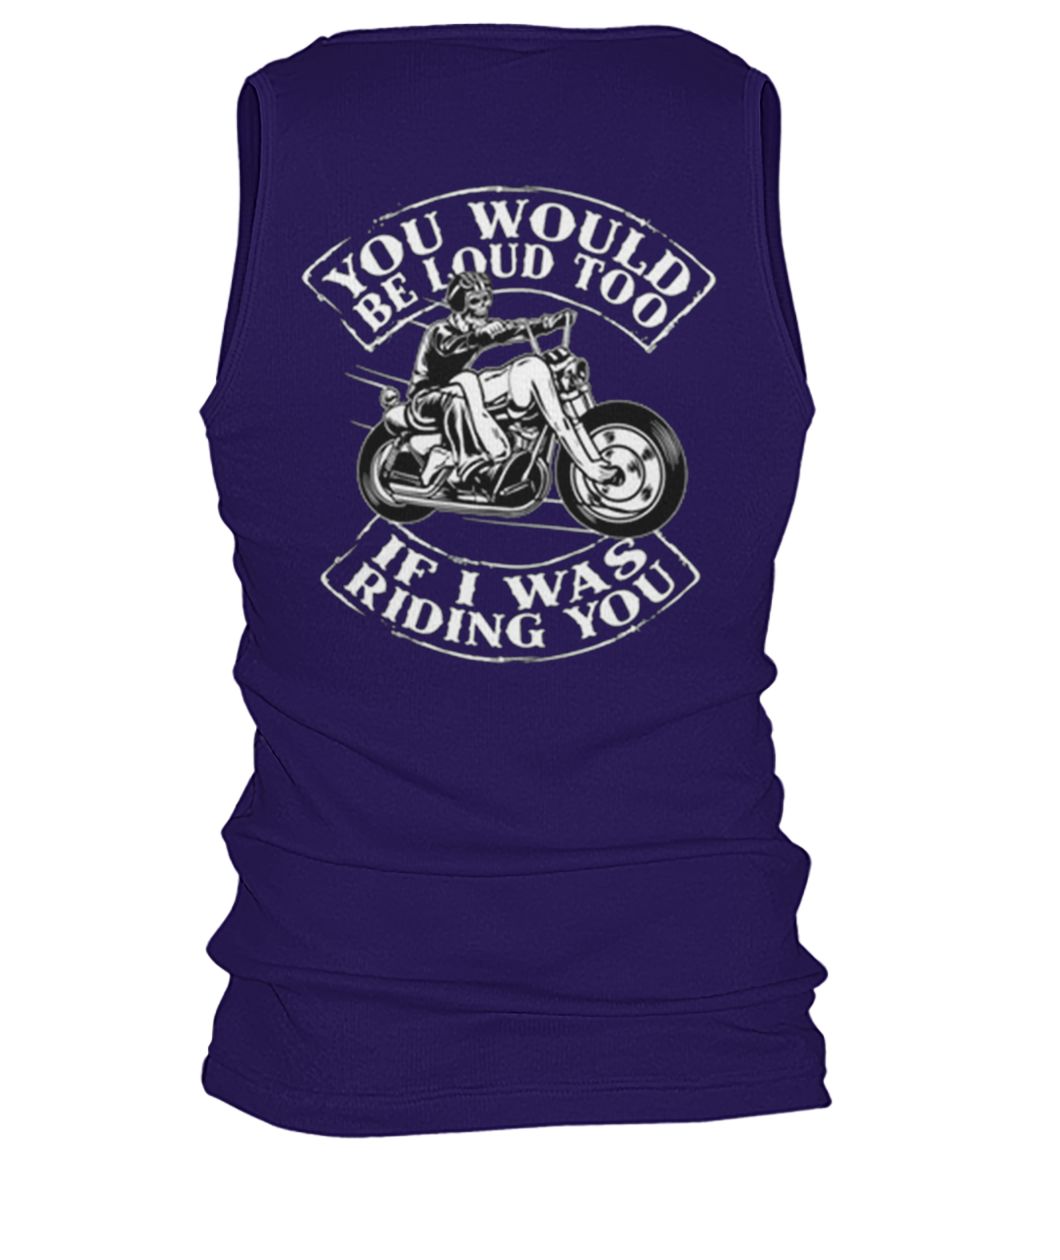 You would be loud too if I was riding you men's tank top